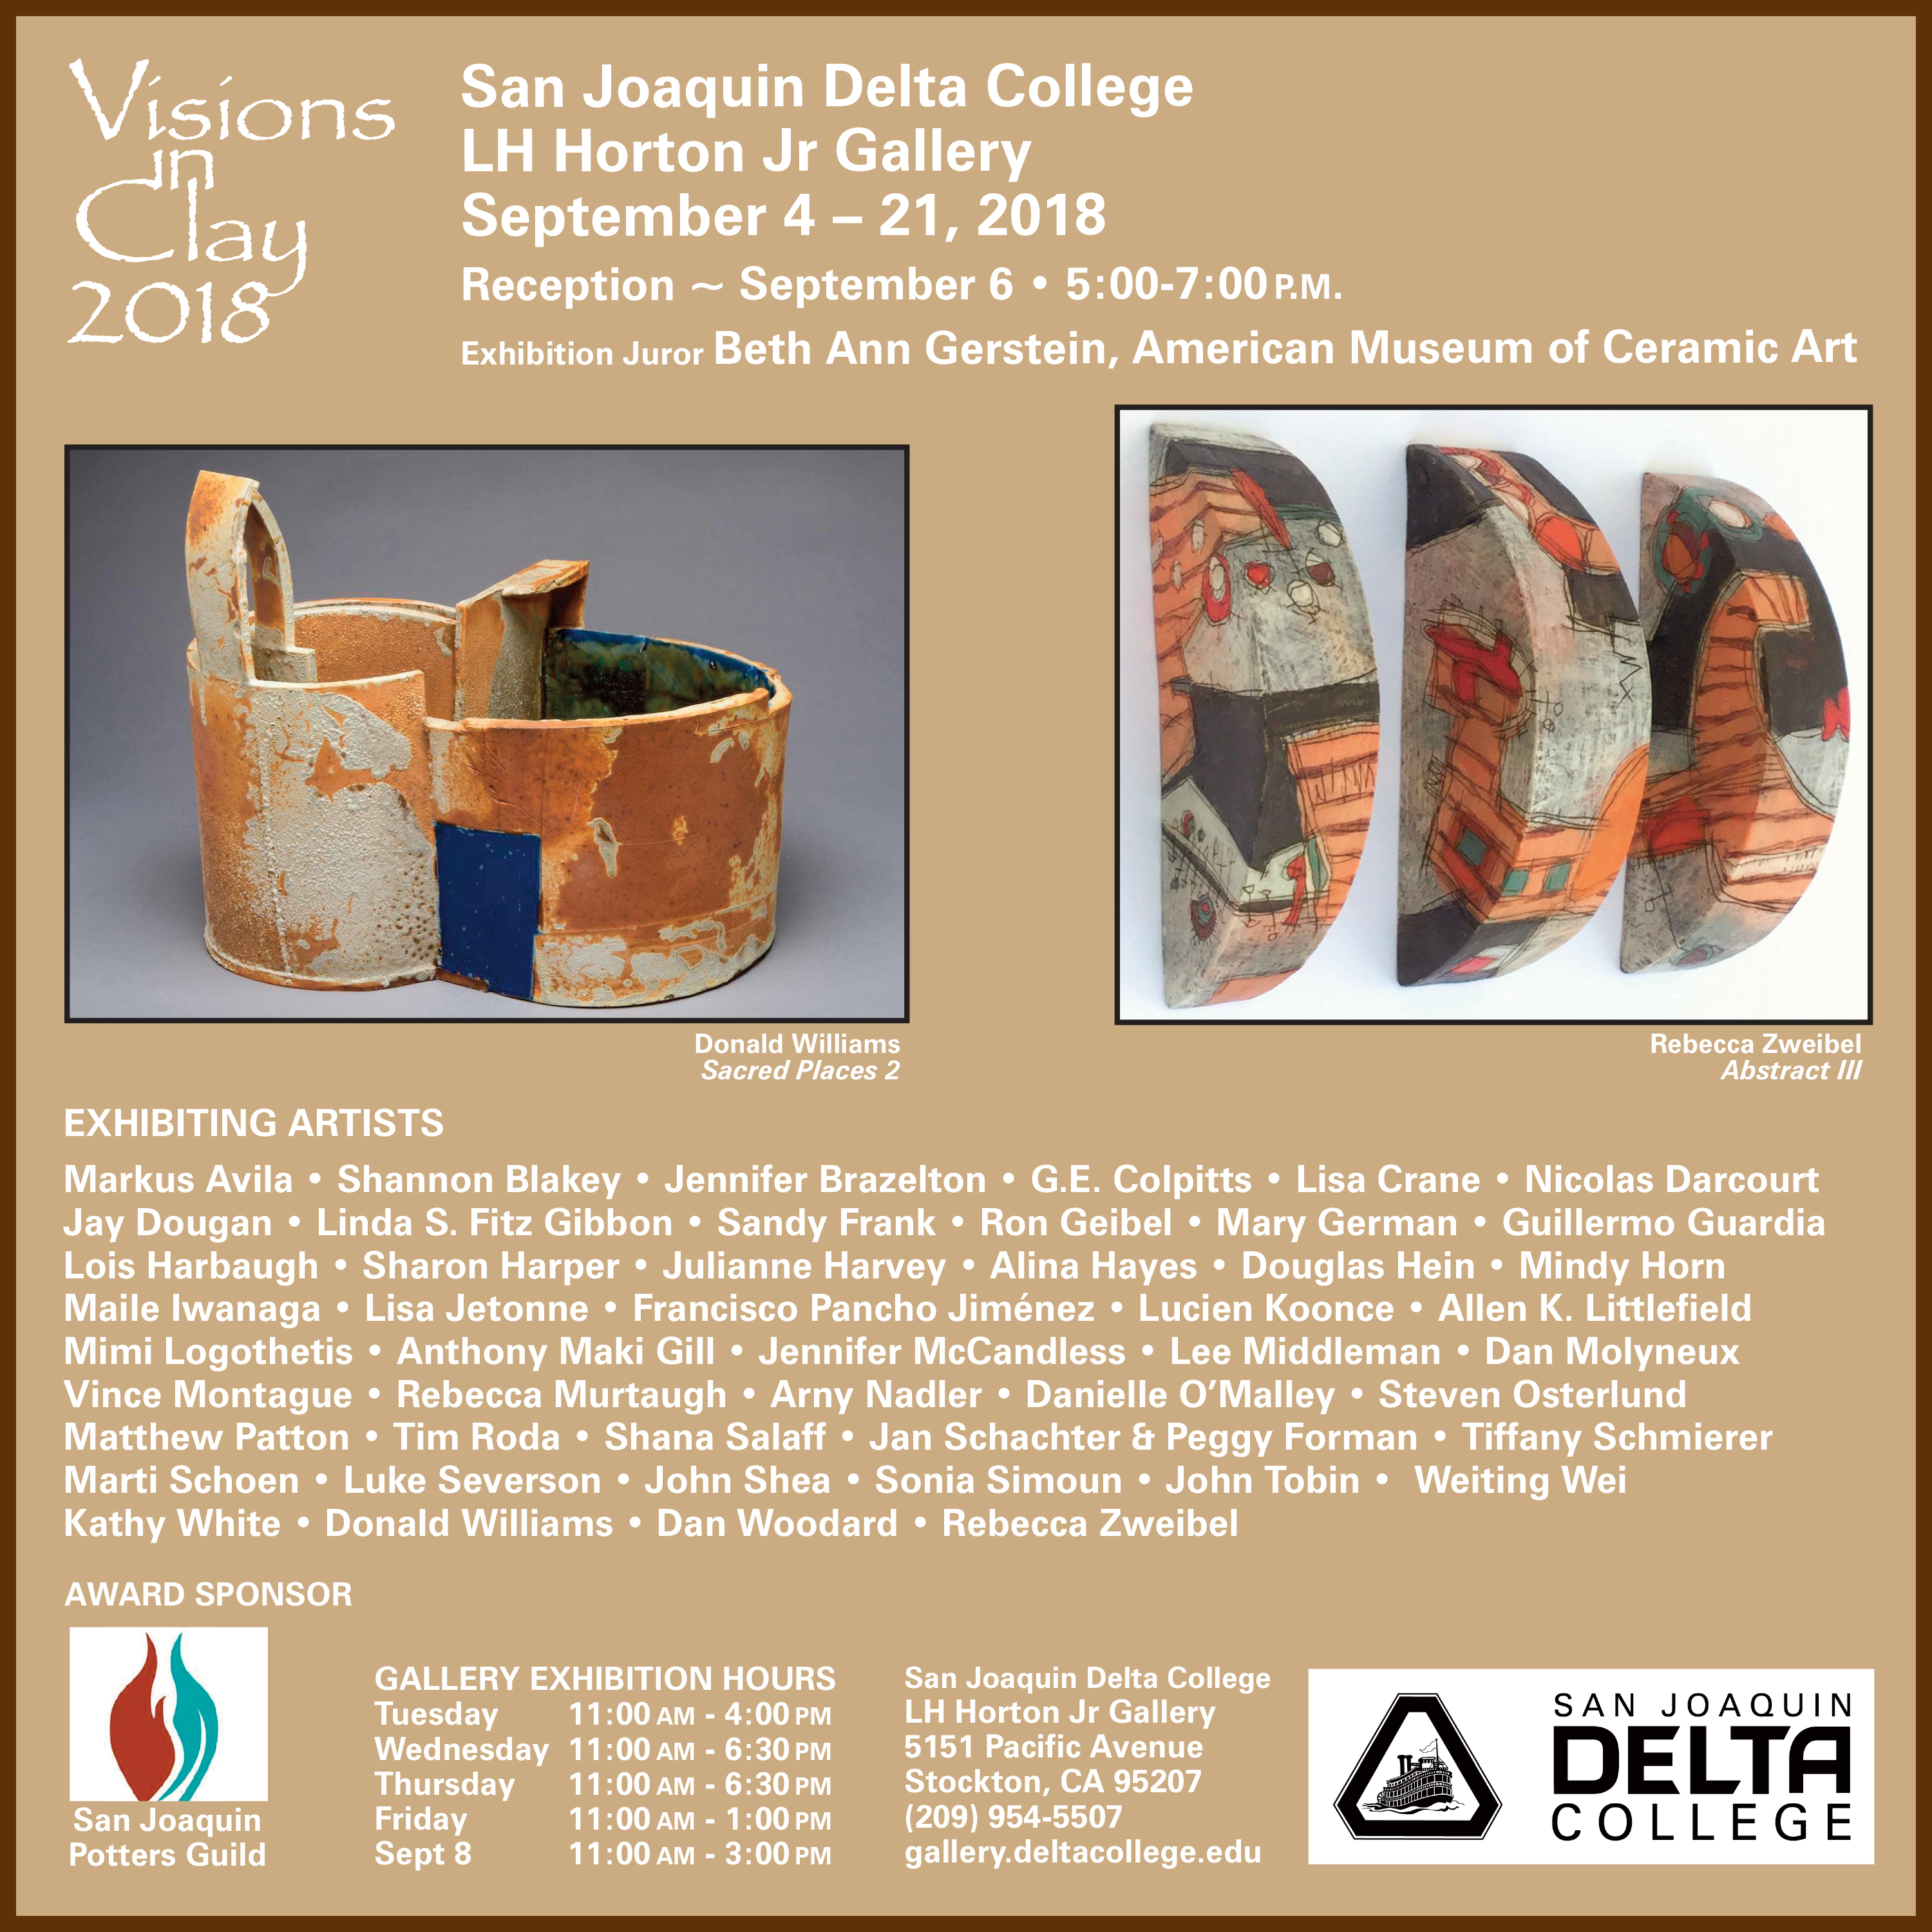 'Visions in Clay' at San Joaquin Delta College is the largest ceramics show in the San Joaquin Valley.